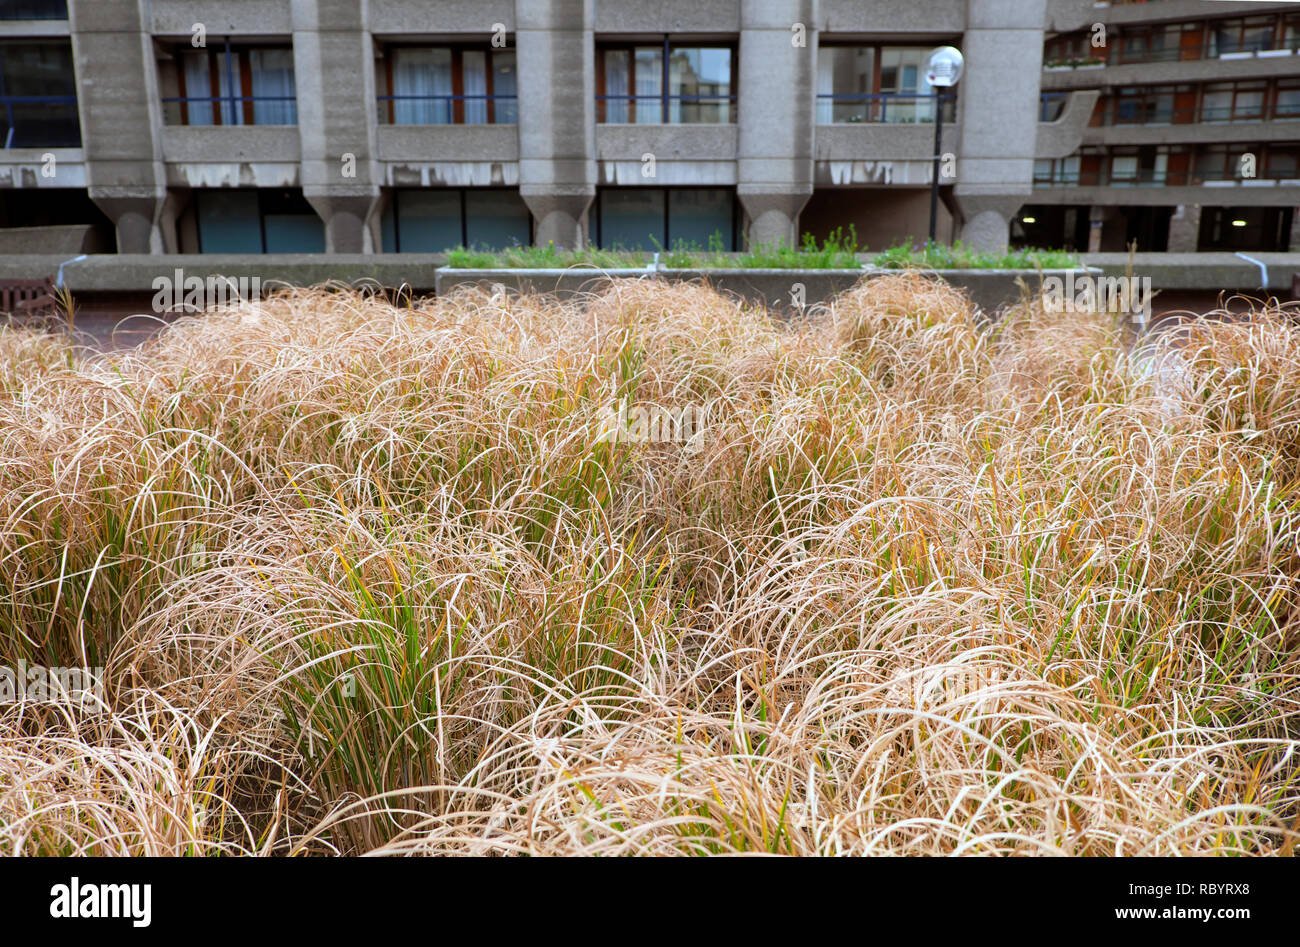 Stipa arundinacea or ornamental grass growing outside Barbican apartments  in winter in Beech Street gardens in the City of London UK  KATHY DEWITT Stock Photo